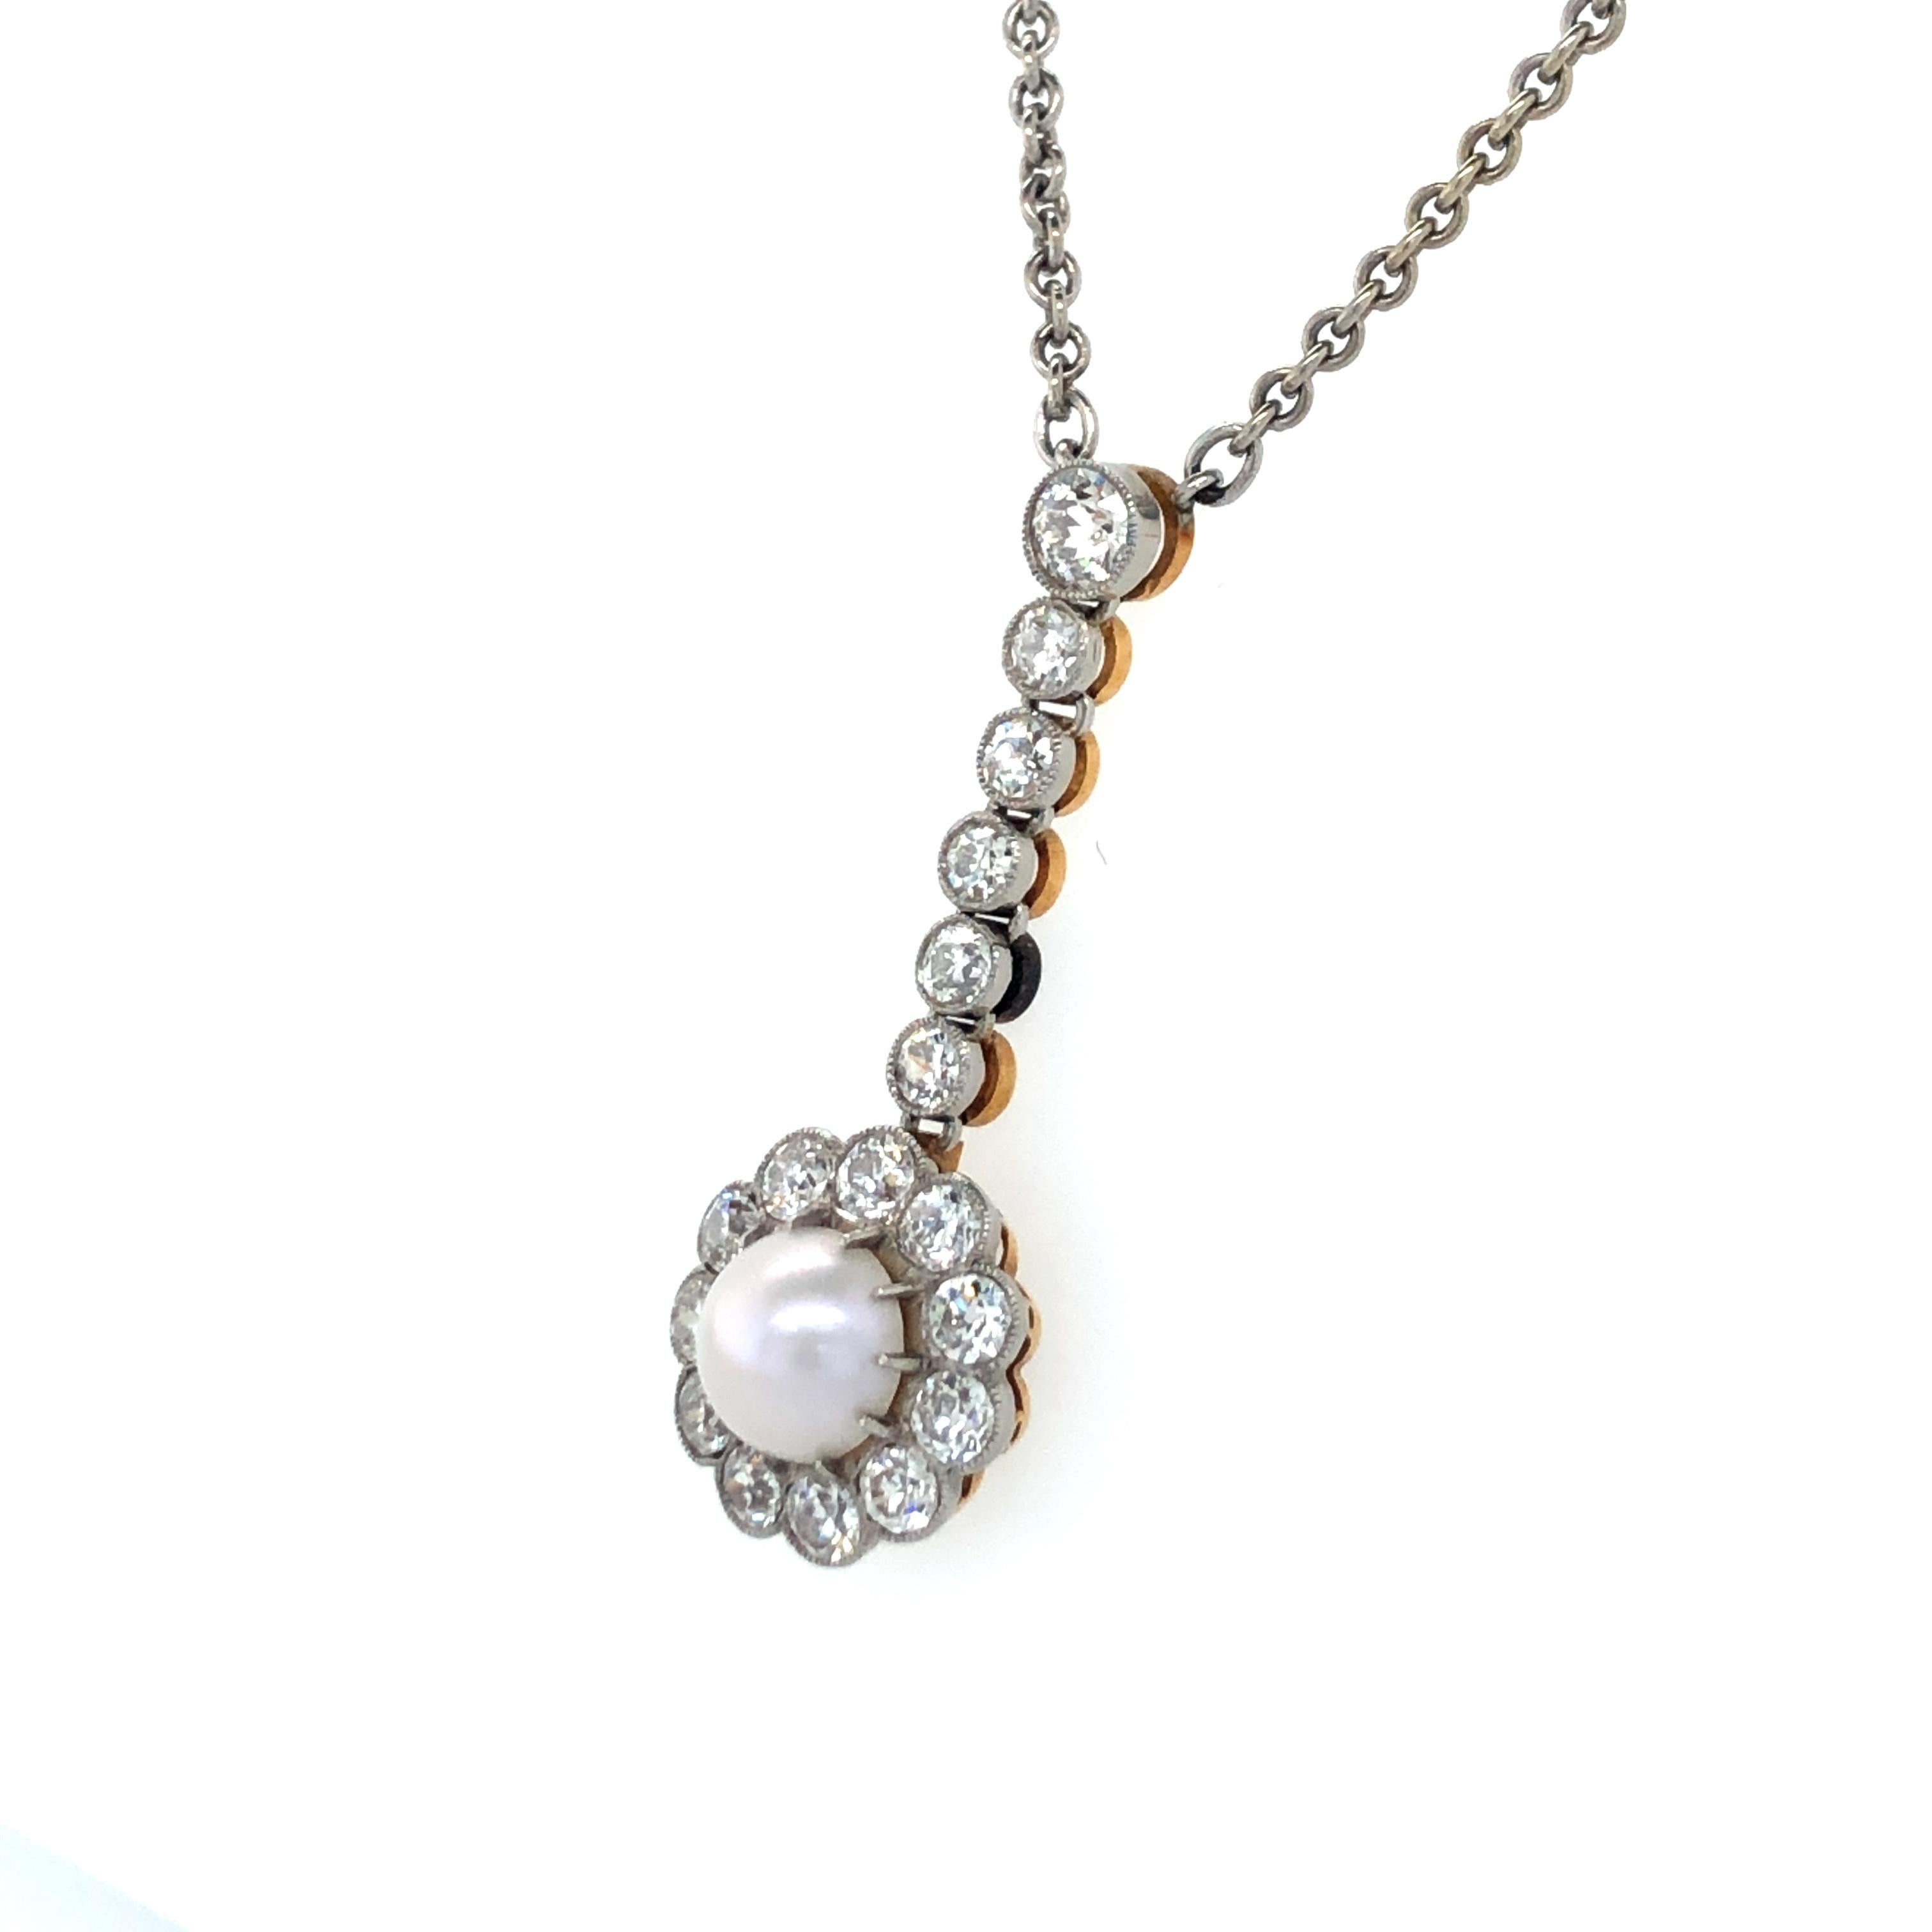 This charming Belle Époque pendant necklace features a white half pearl of 6.6 mm in diameter, set in 11 delicate prongs and surrounded by 11 Old European cut diamonds of H/I colour and si claritiy. This beautiful pearl and diamond flower is